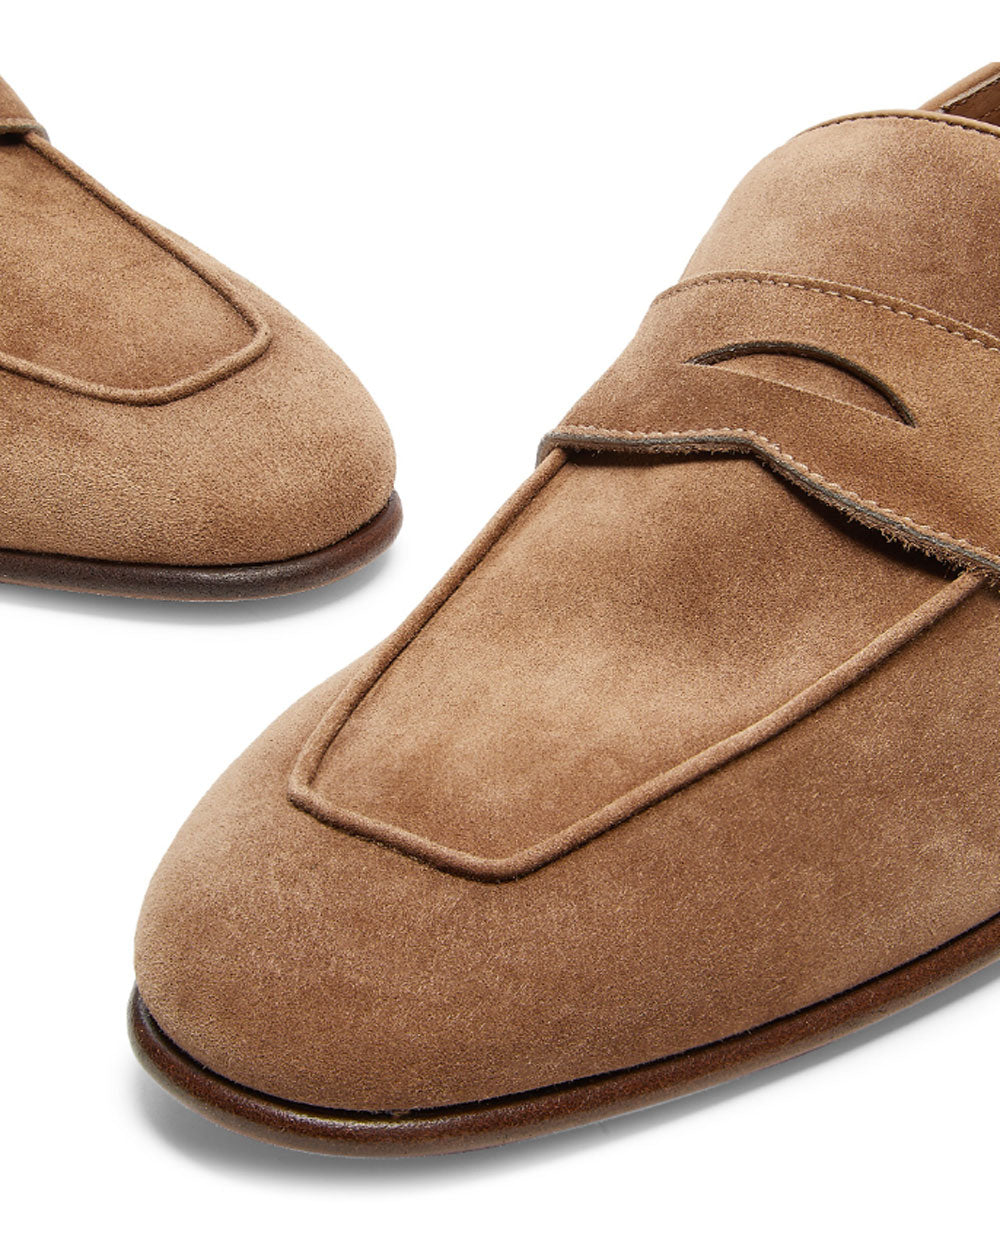 Suede Penny Loafer in Brown